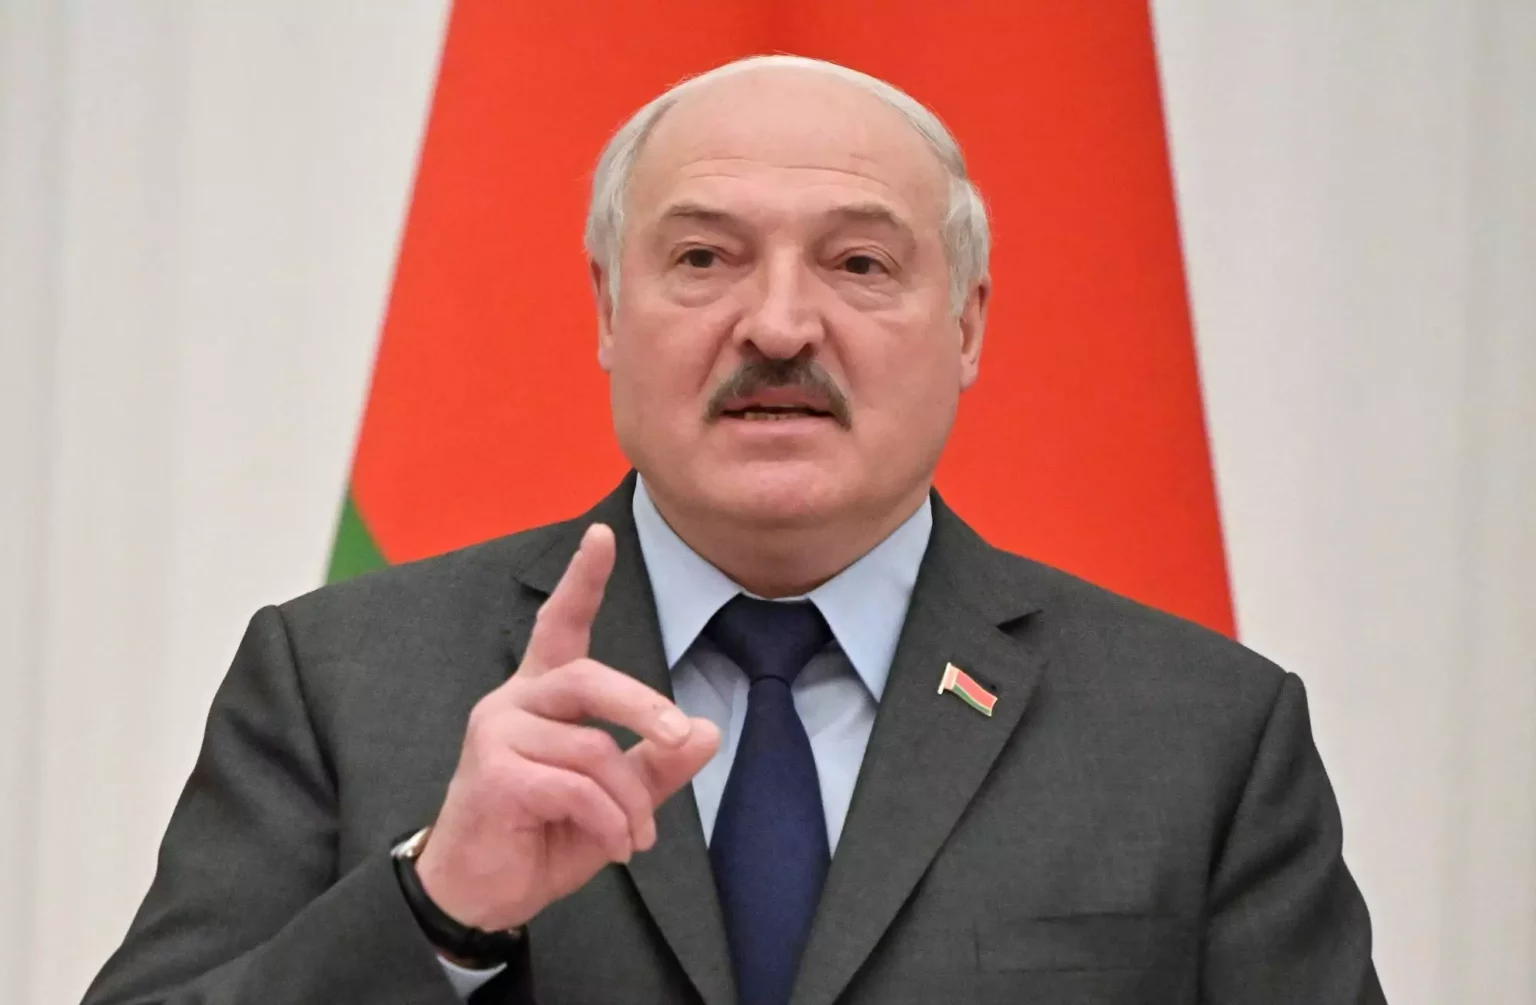 belarus-leader-says-he-wants-guarantees-that-russia-would-defend-his-country-if-it-is-attacked